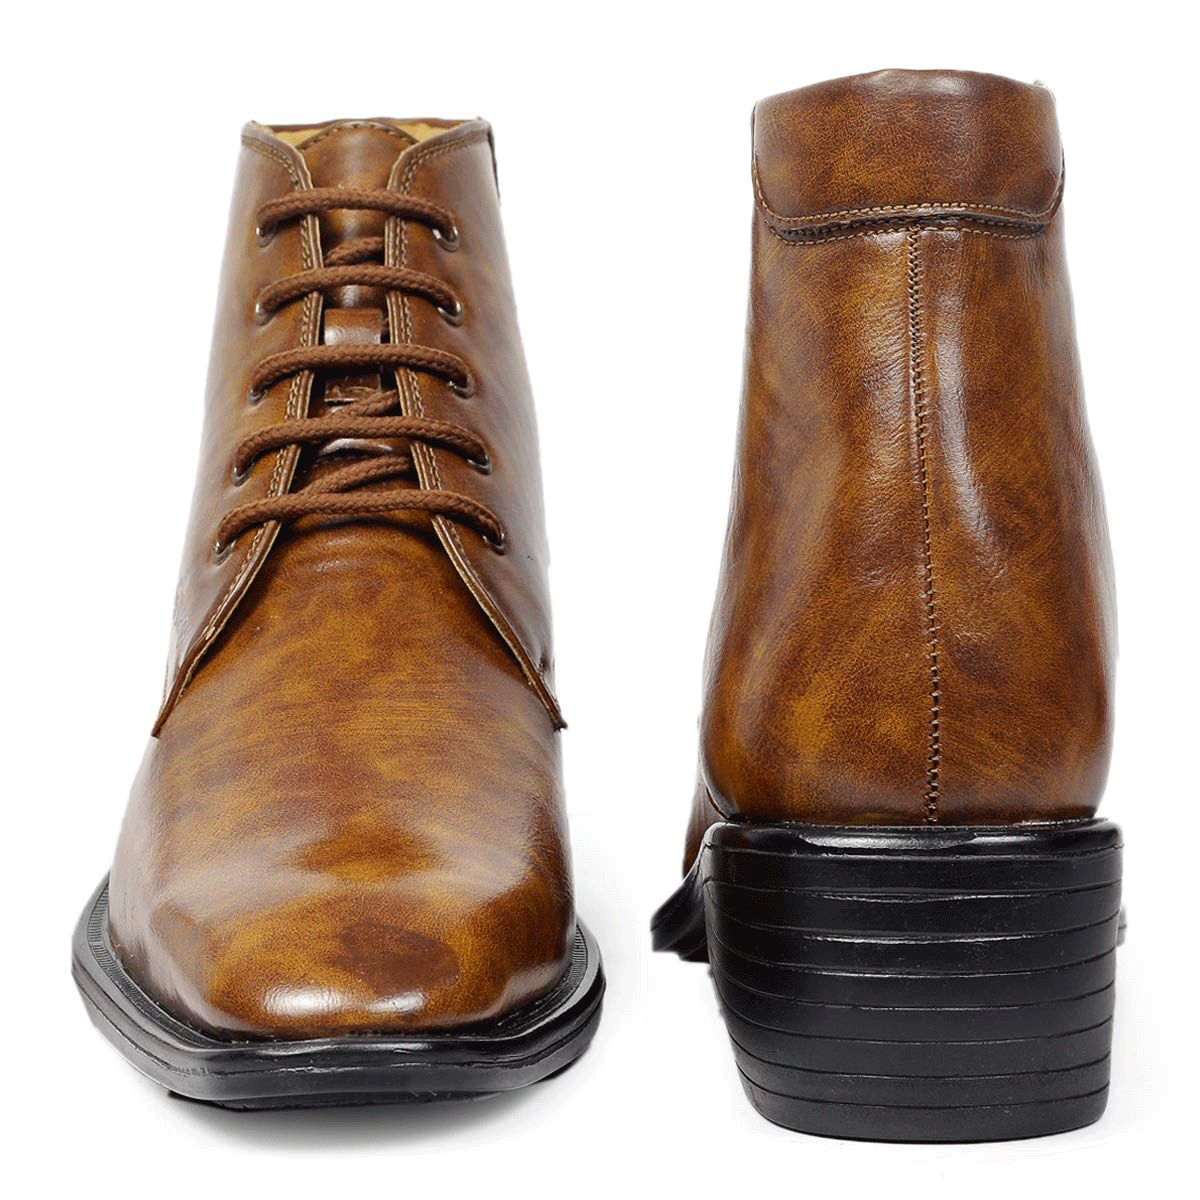 High Ankle Height Increasing Tan Casual And Outdoor Boots With Lace-Up Pattern-Unique and Classy